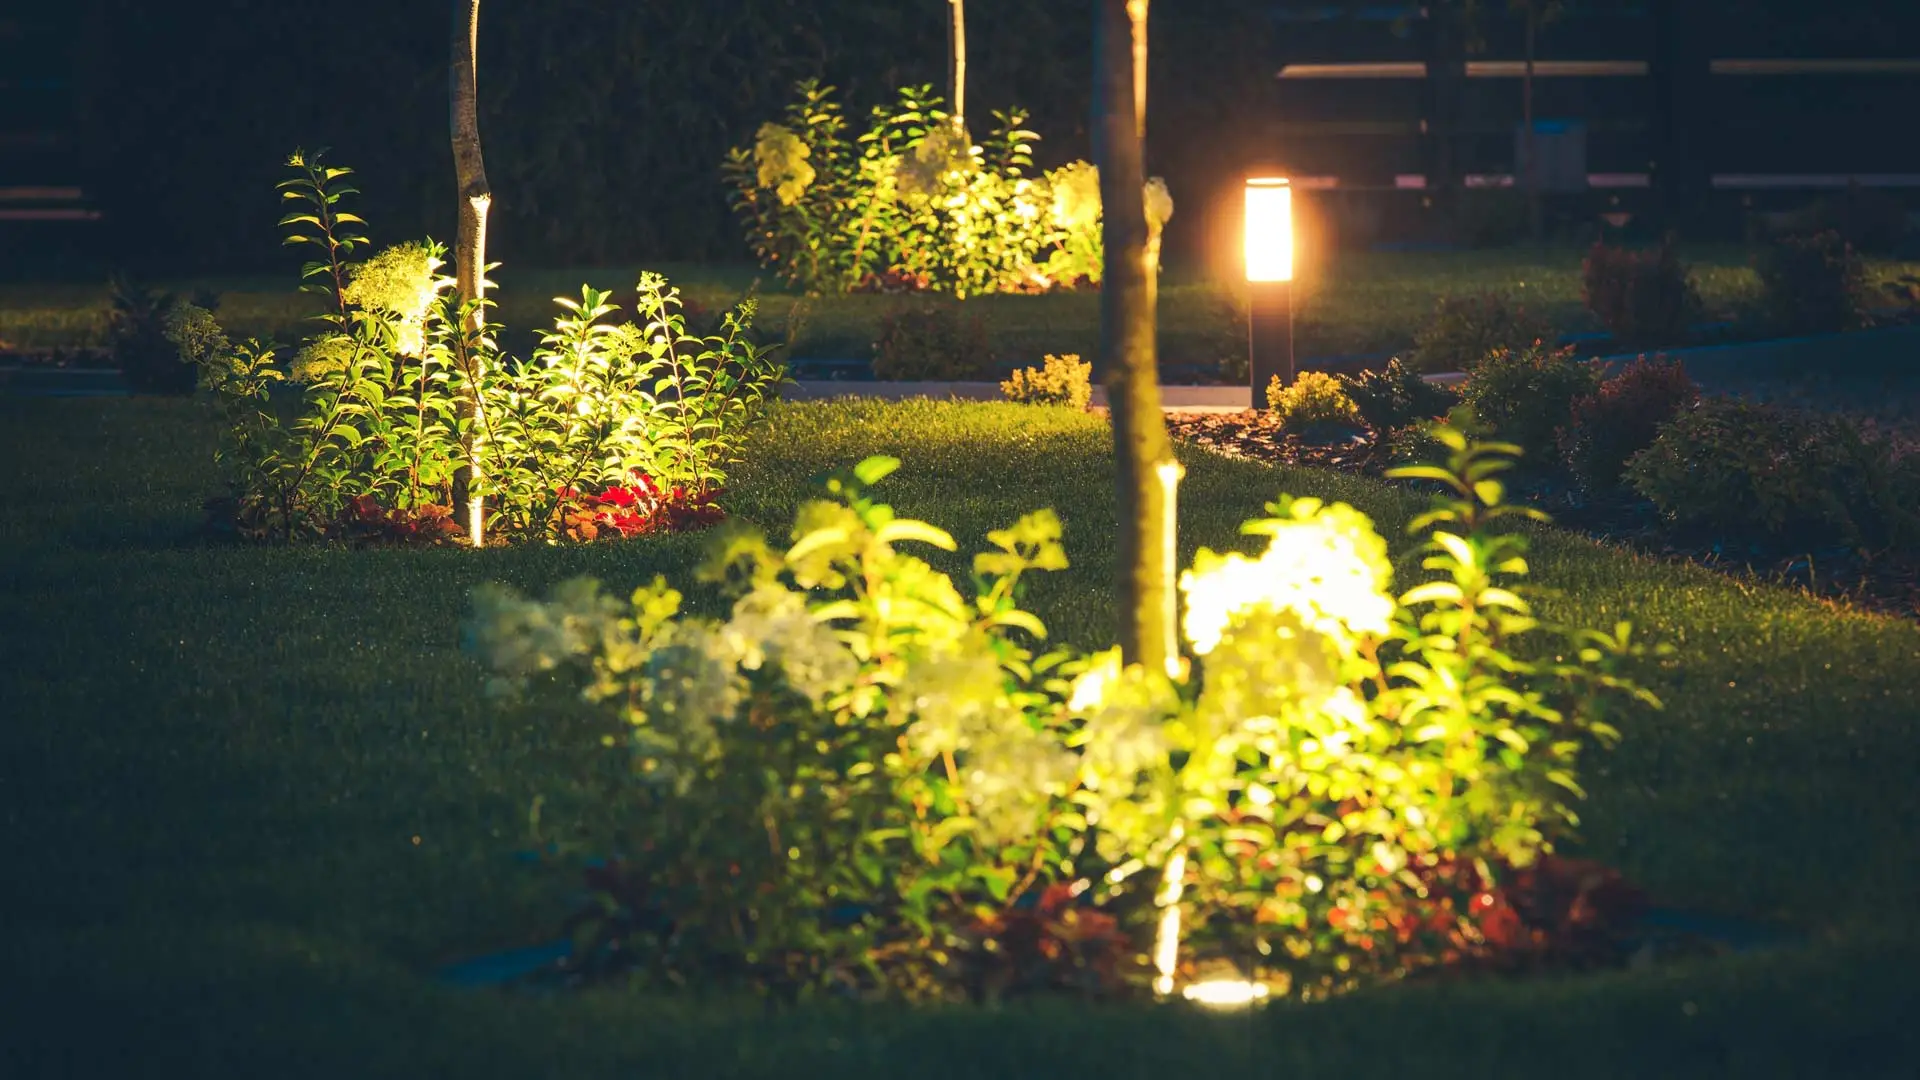 Investing in Landscape Lighting? Make Sure You Use LED Bulbs!